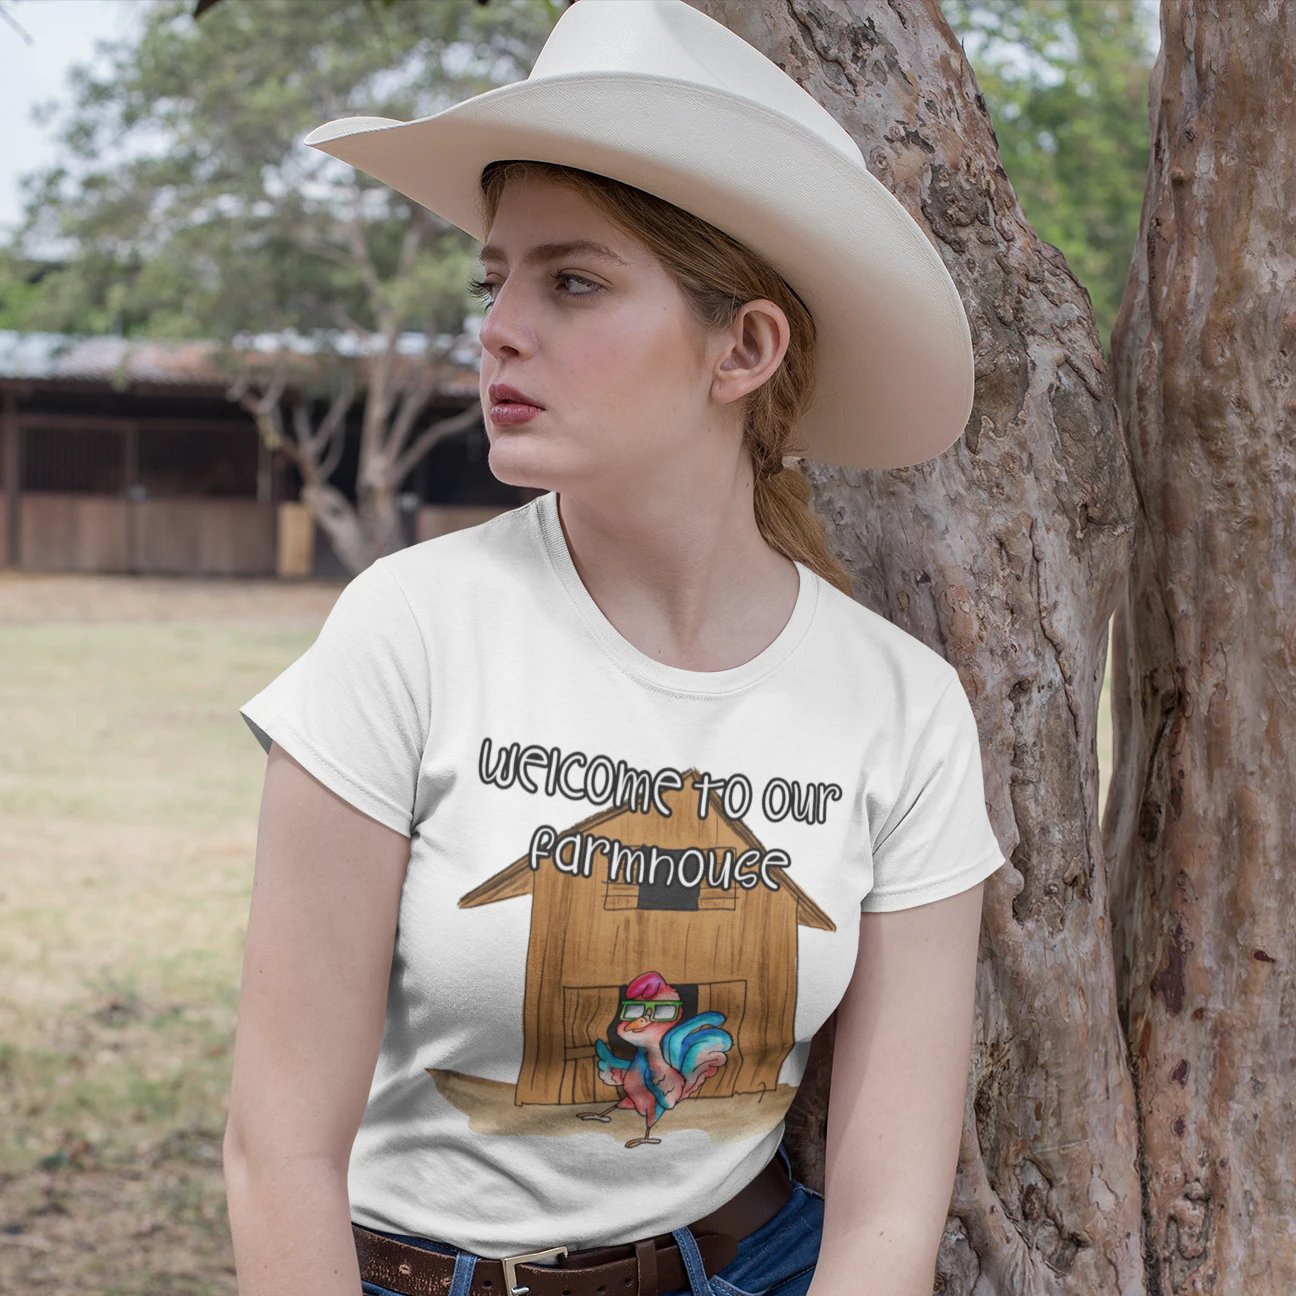 Heartfelt Homestead: 'Welcome to Our Farmhouse' T-shirt – Where Warmth Meets Rural Hospitality!